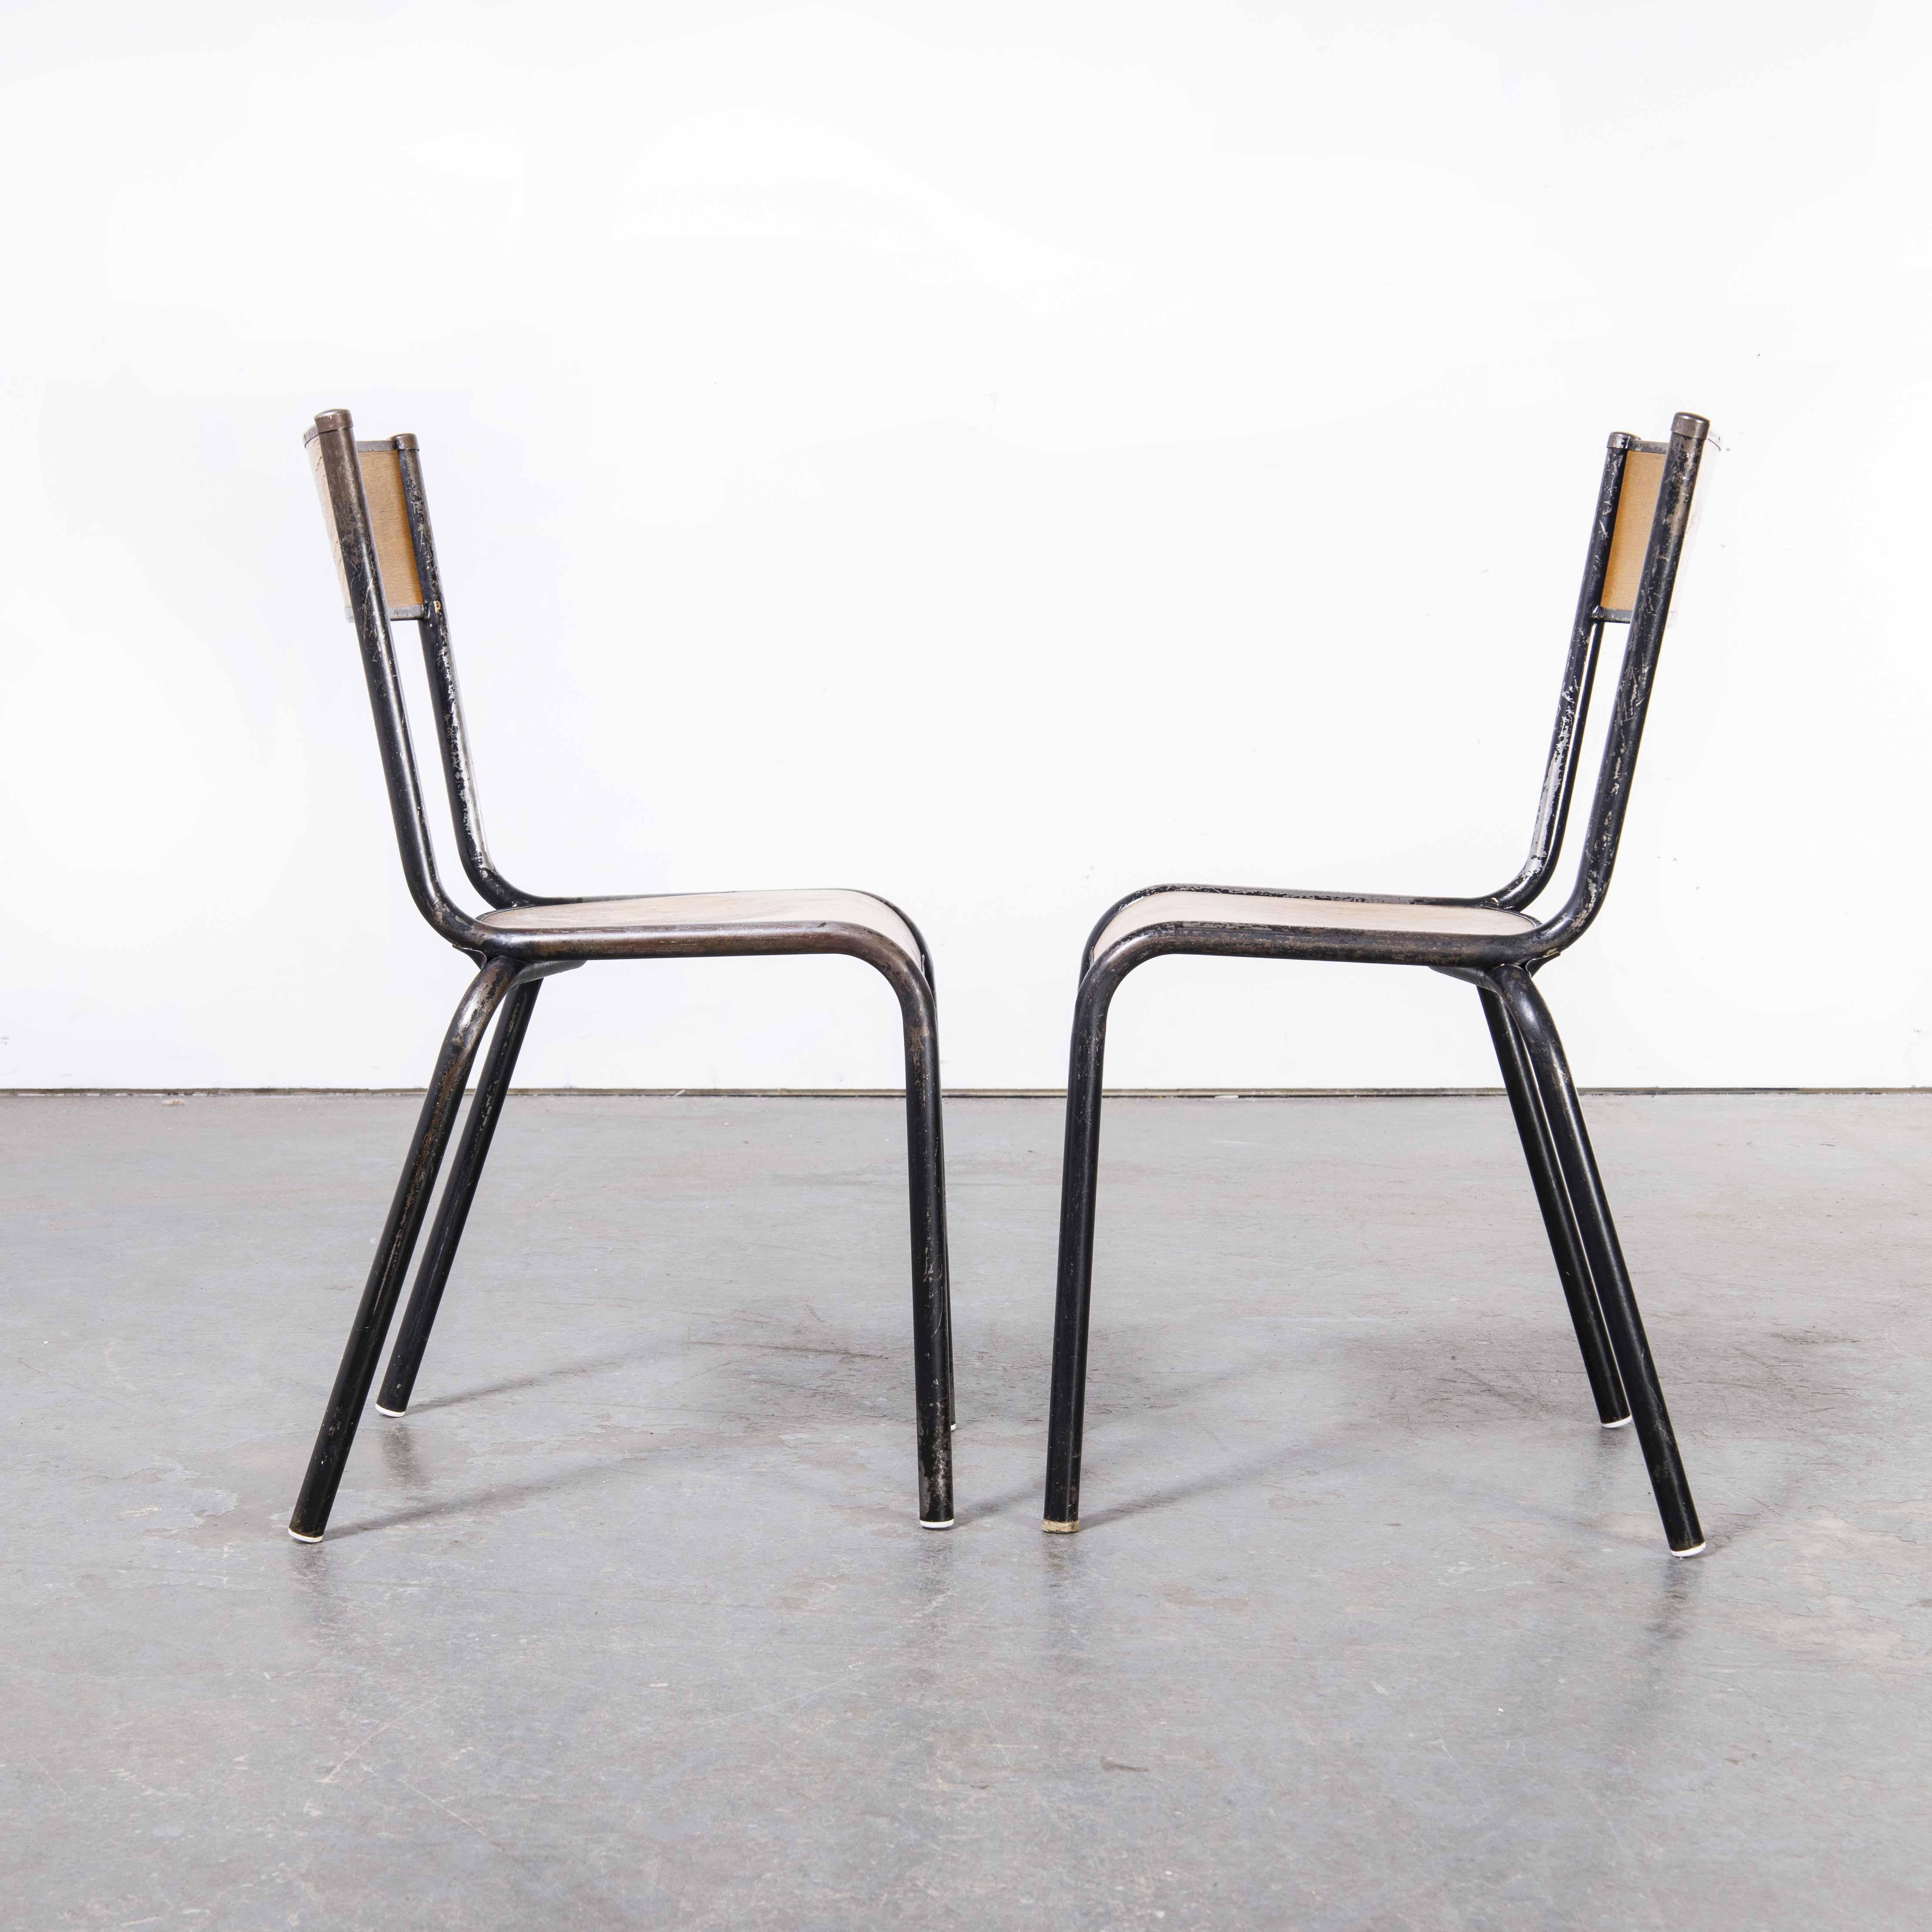 1960's, French Mullca Stacking Chair, Black Frame, Pair For Sale 2